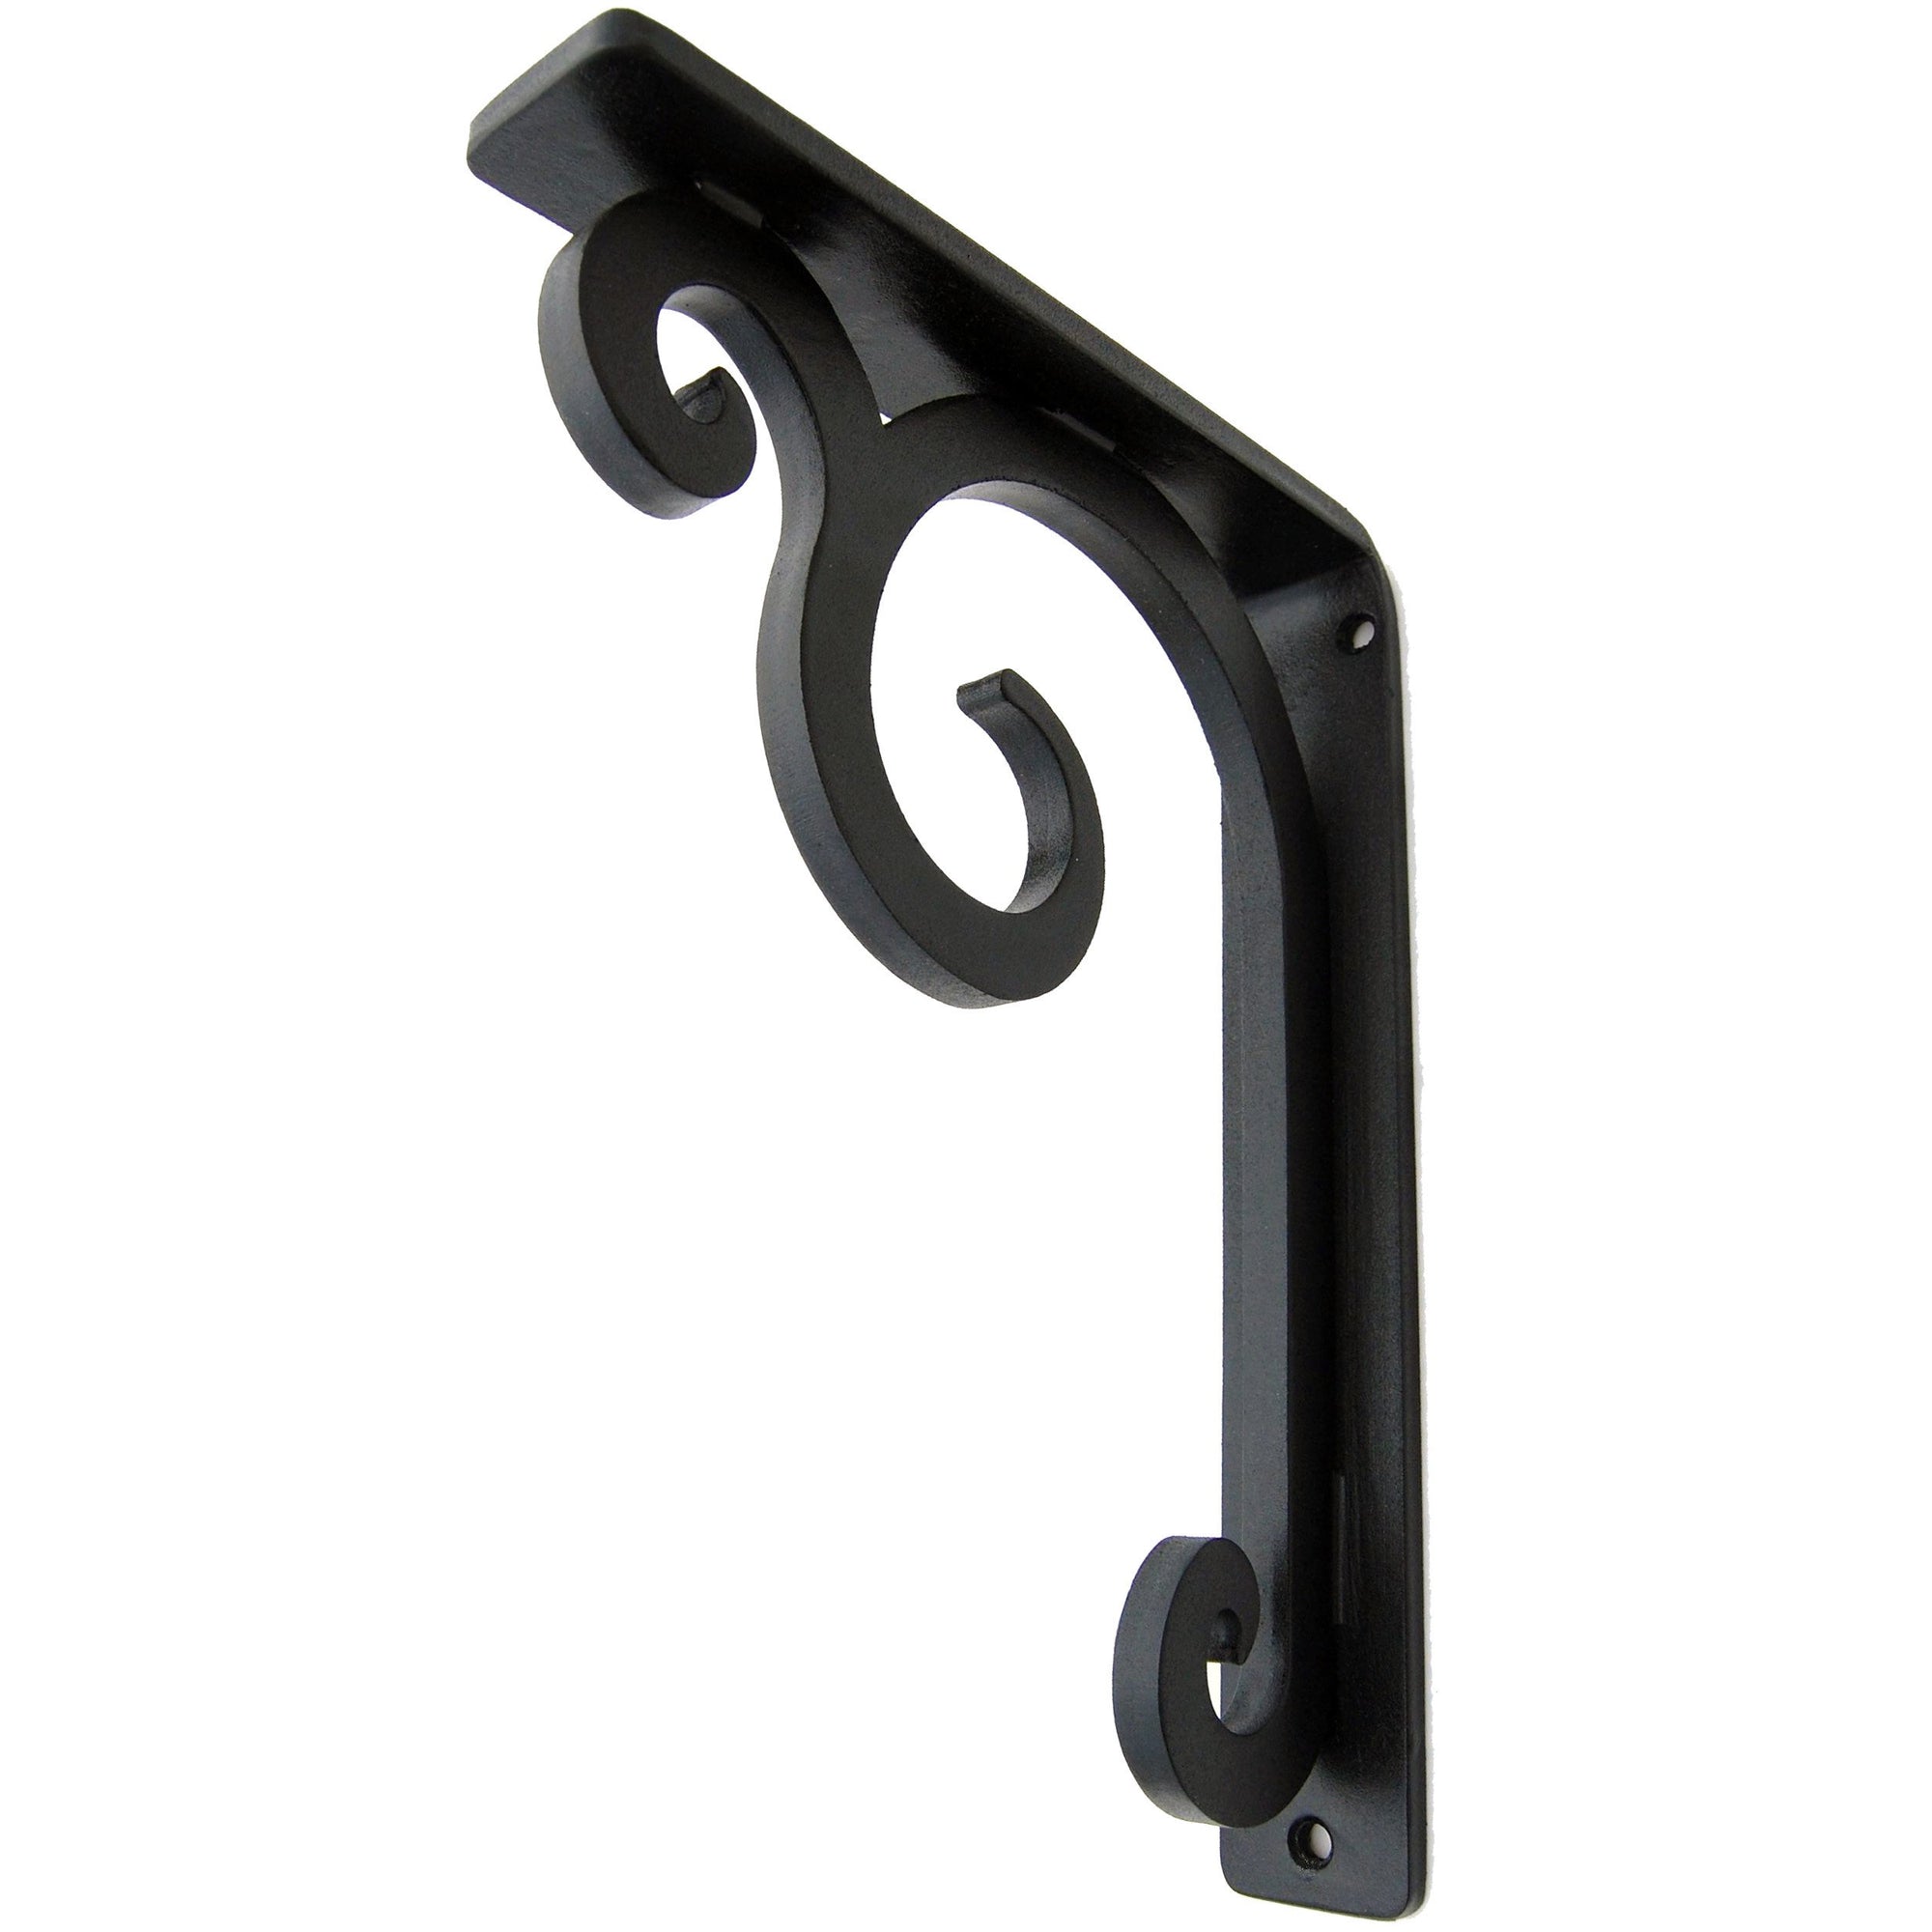 This is our Keaton Iron Shelf Bracket with a rich black iron finish.